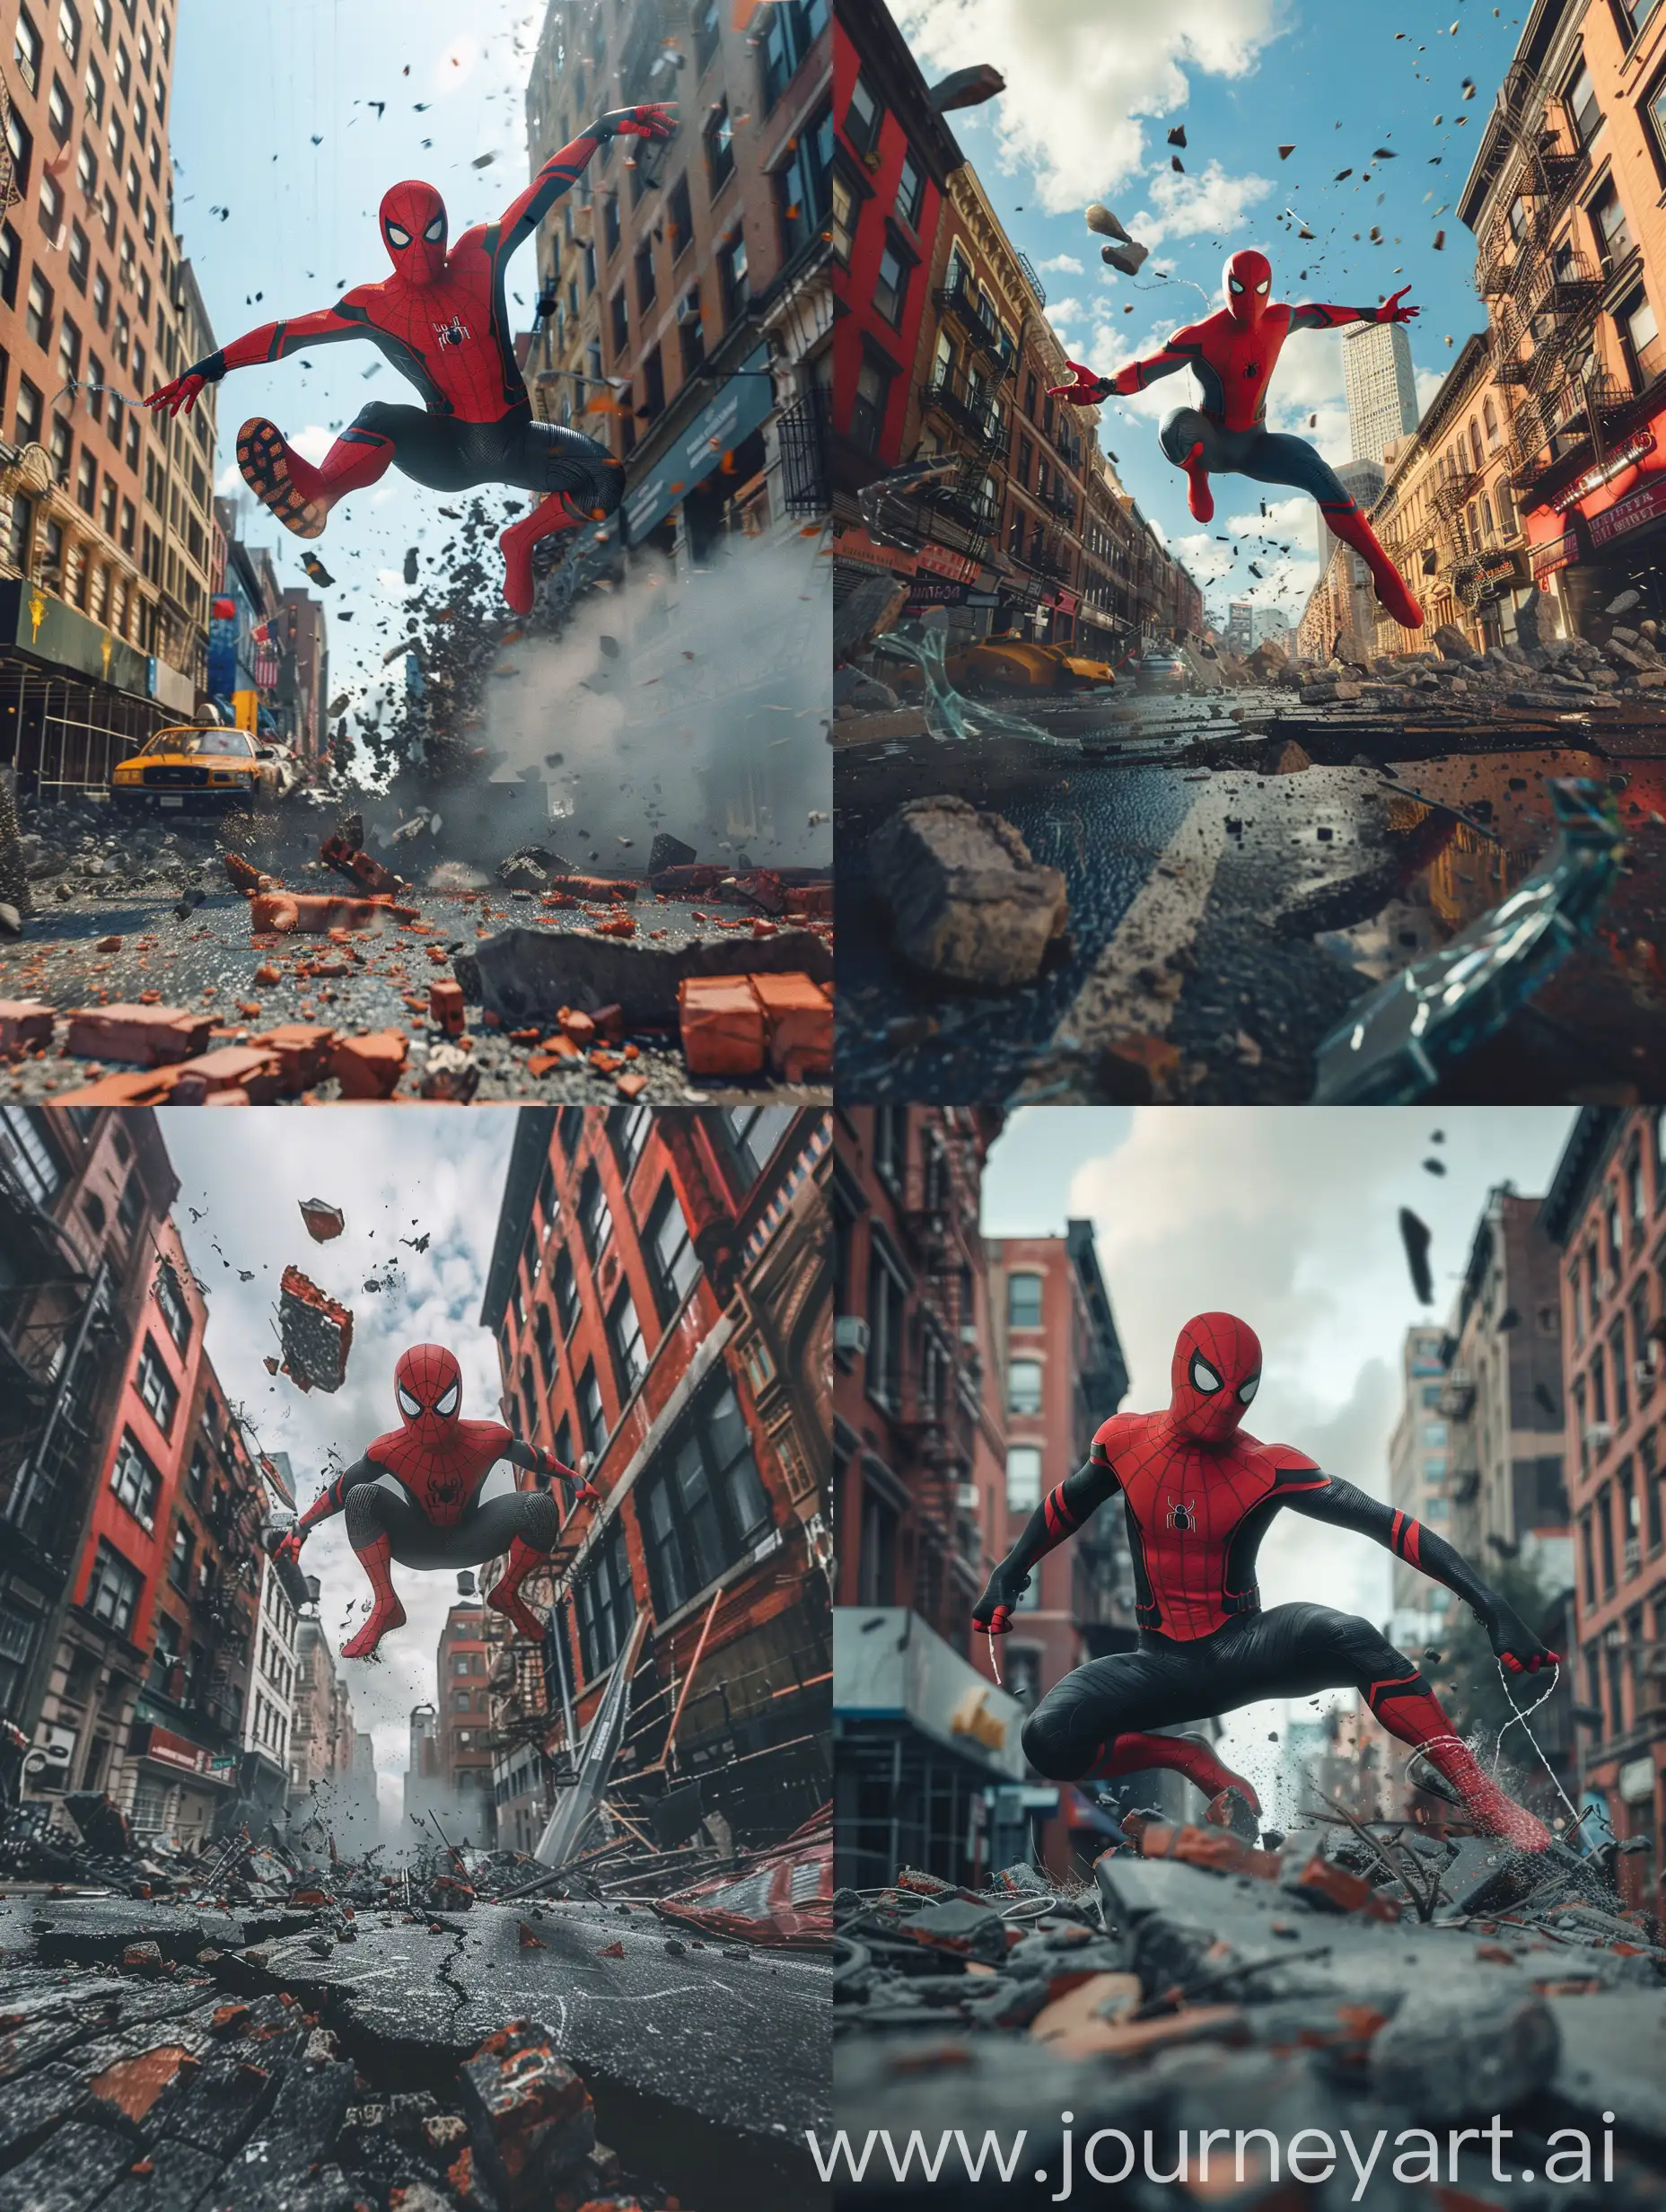 SpiderMans-New-Suit-Freefall-in-PostApocalyptic-Urban-Chaos